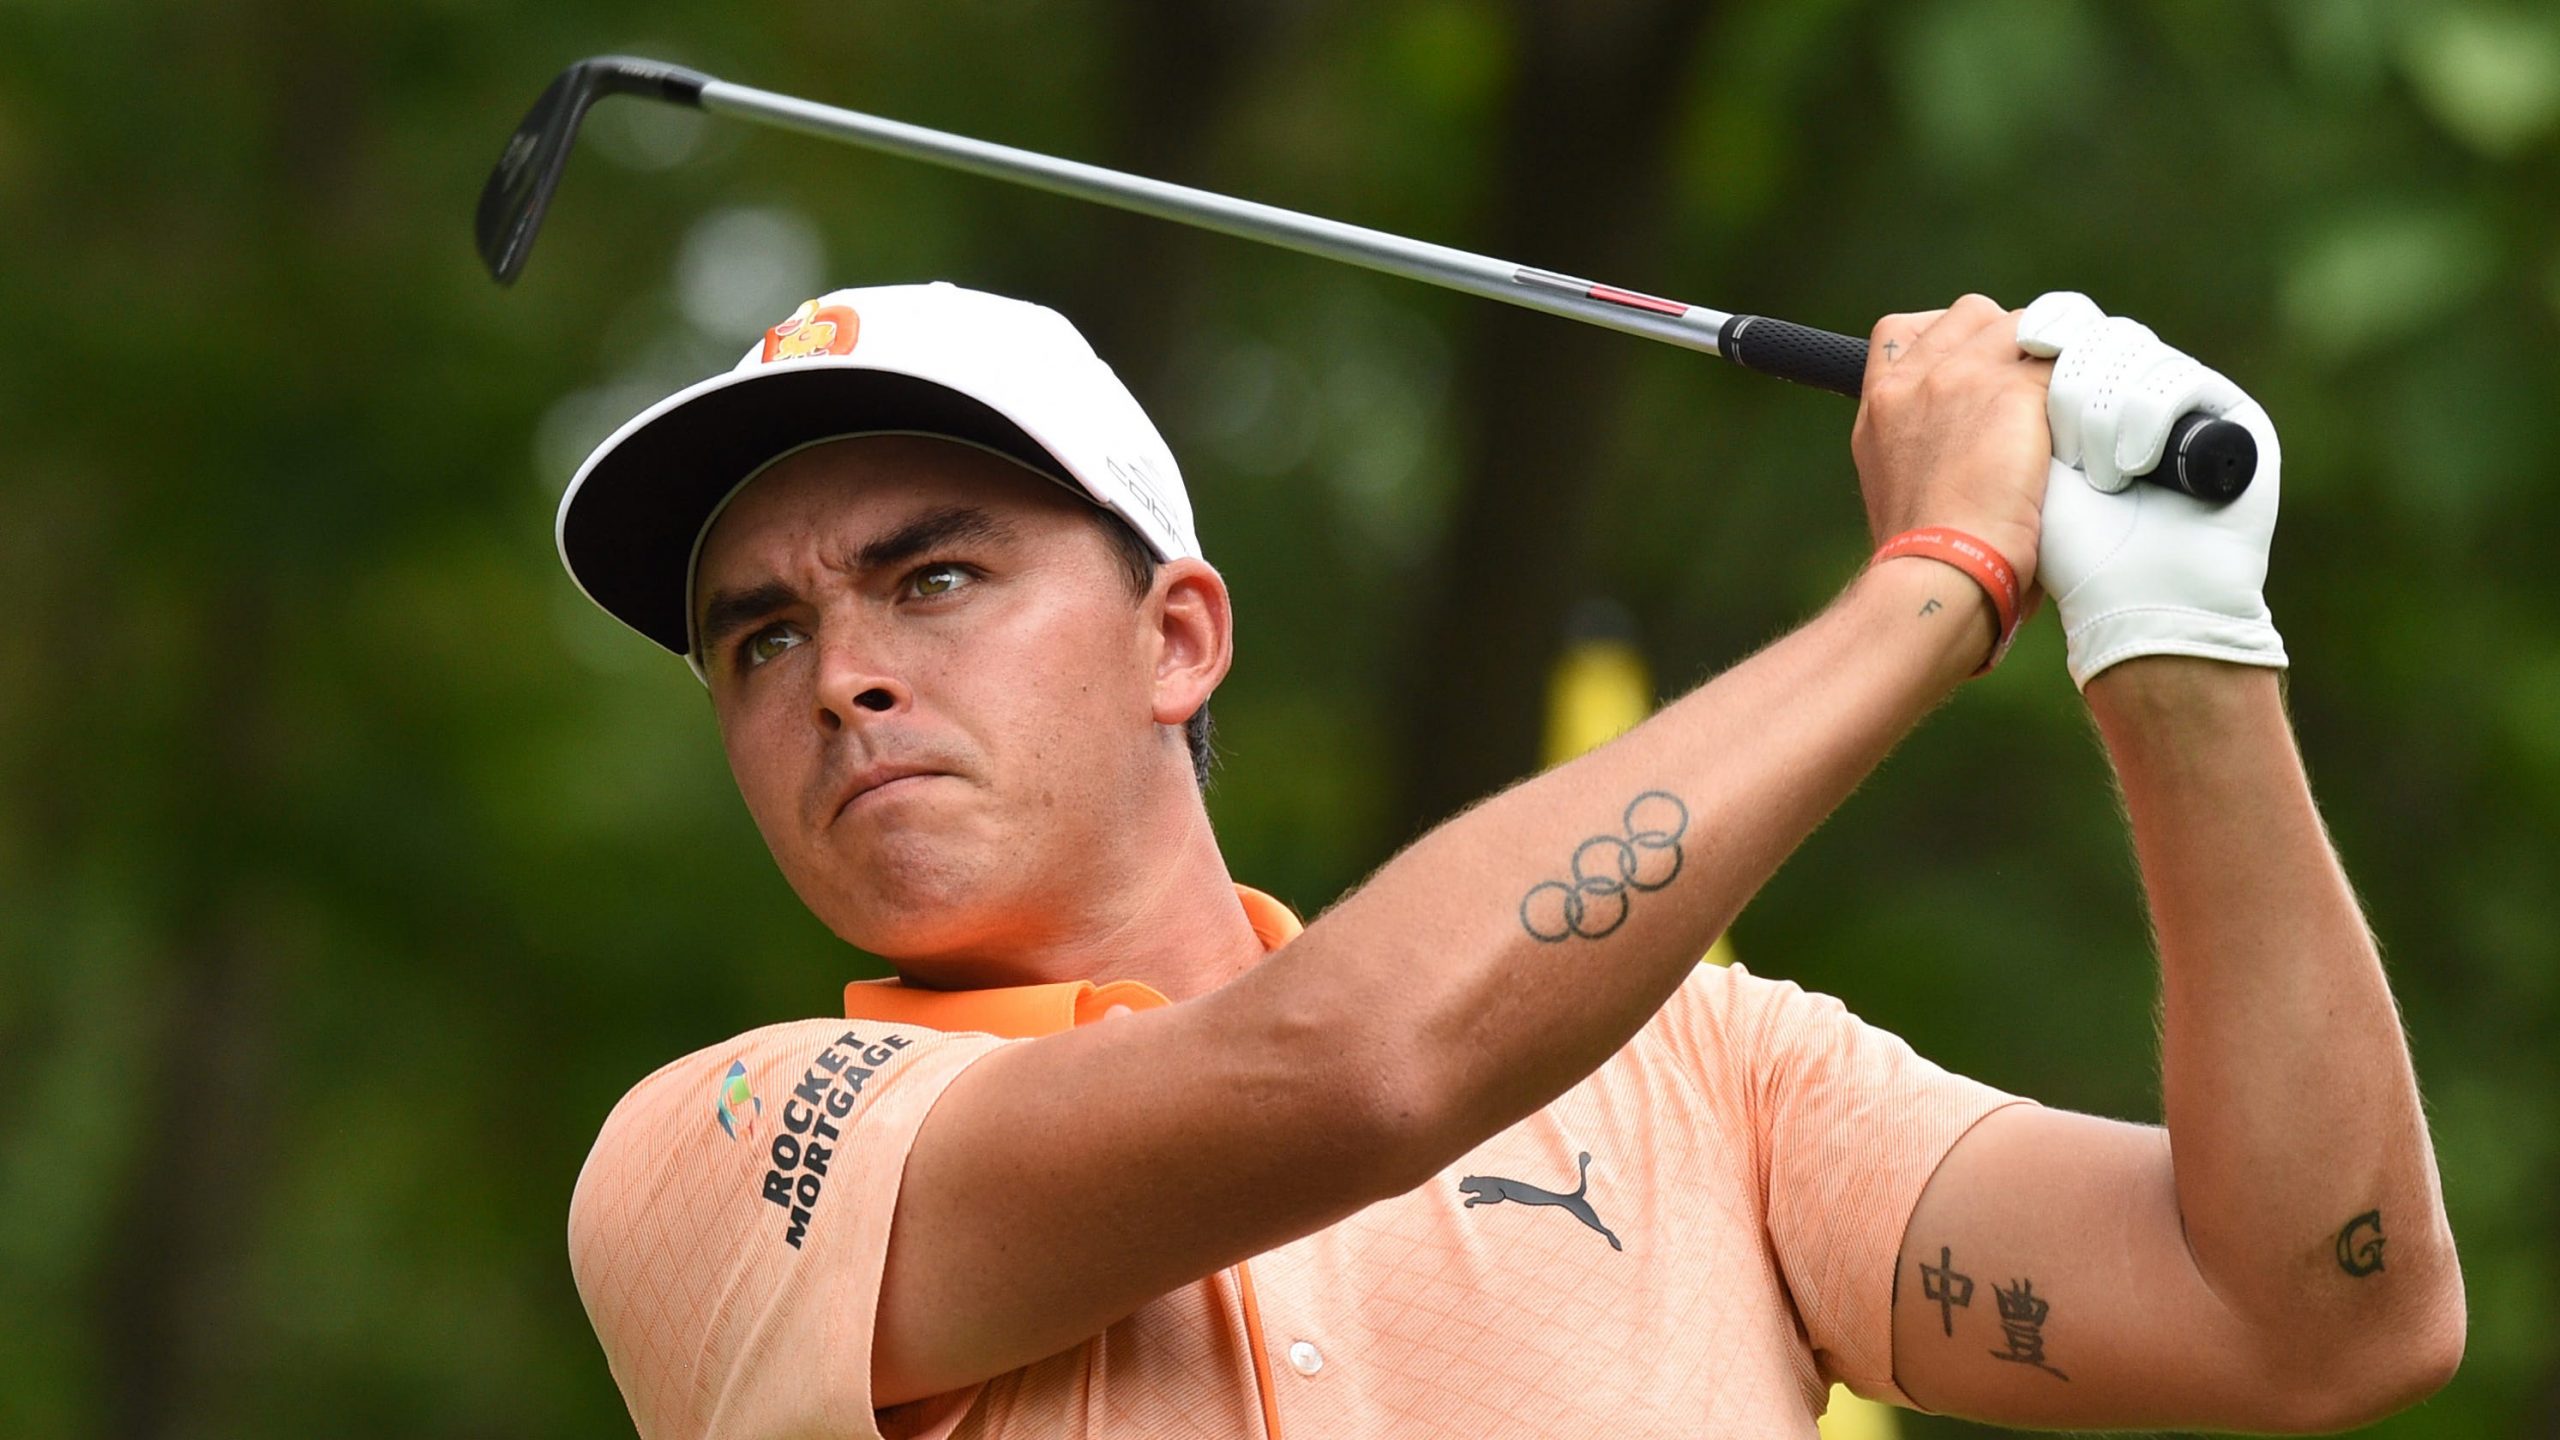 Rising Sons:  Rickie Fowler, Collin Morikawa, Xander Schauffele And Their Japanese Roots